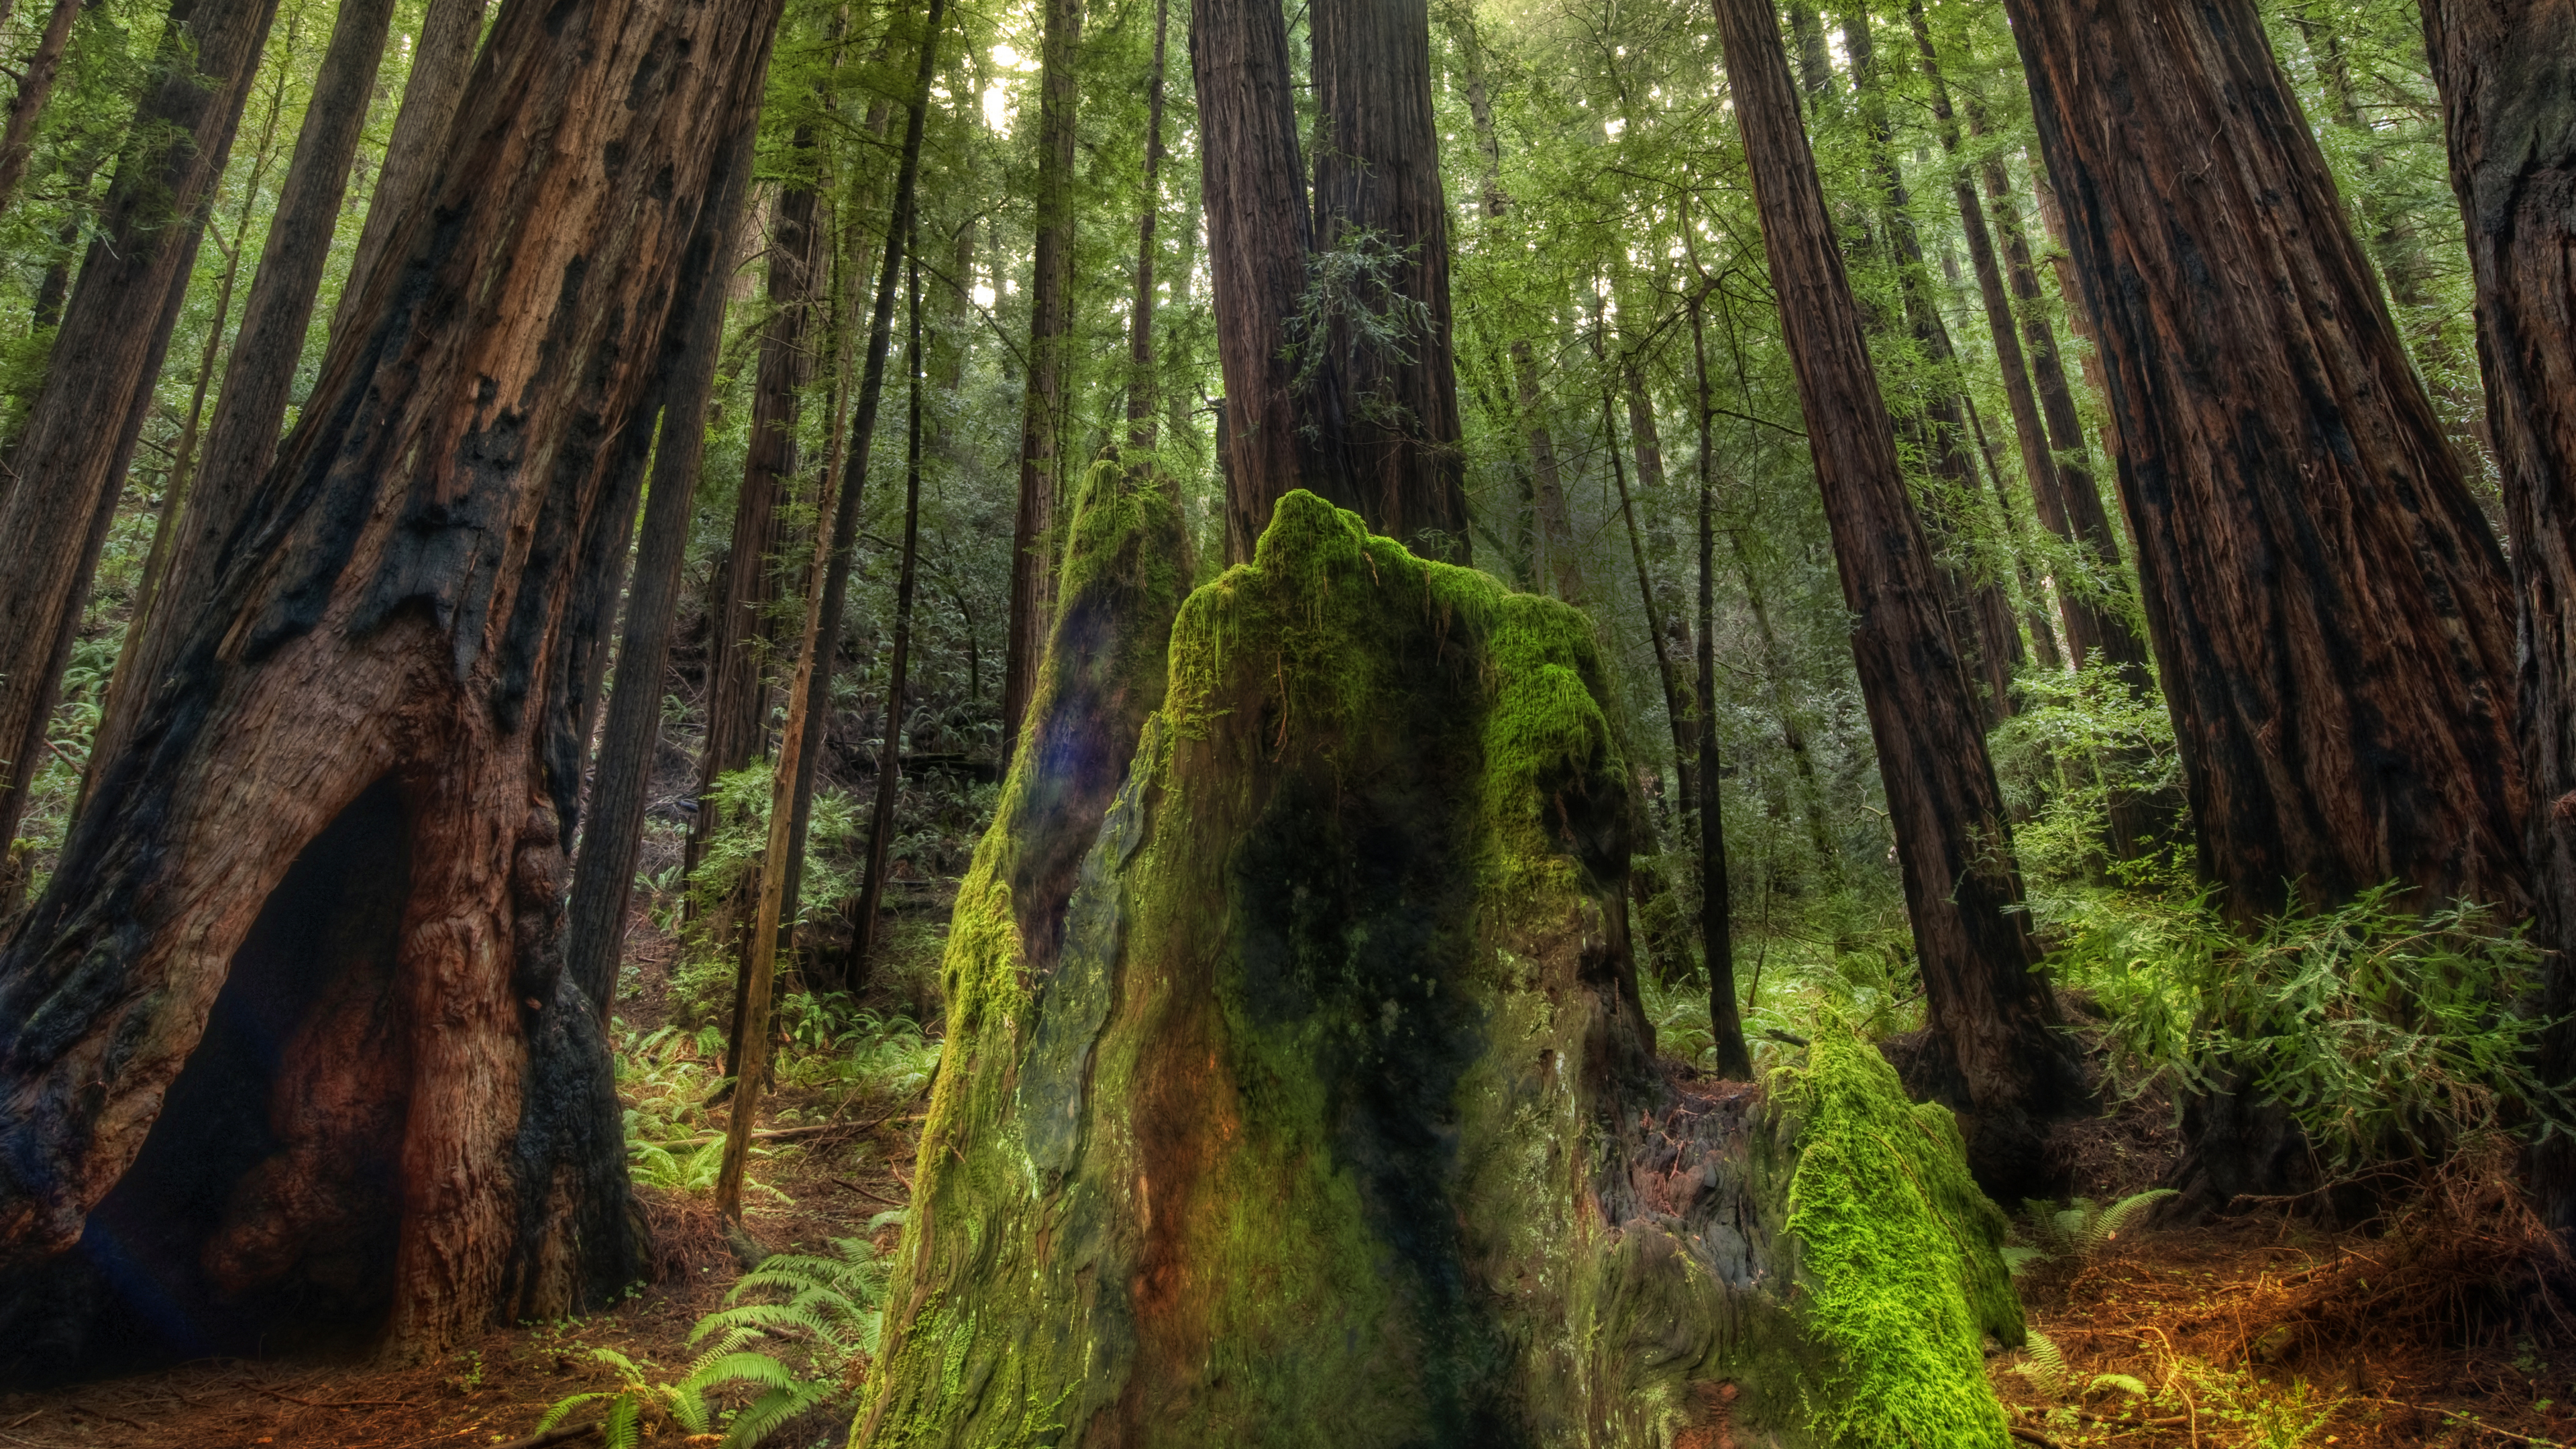 General 3840x2160 Trey Ratcliff photography nature wood forest trees